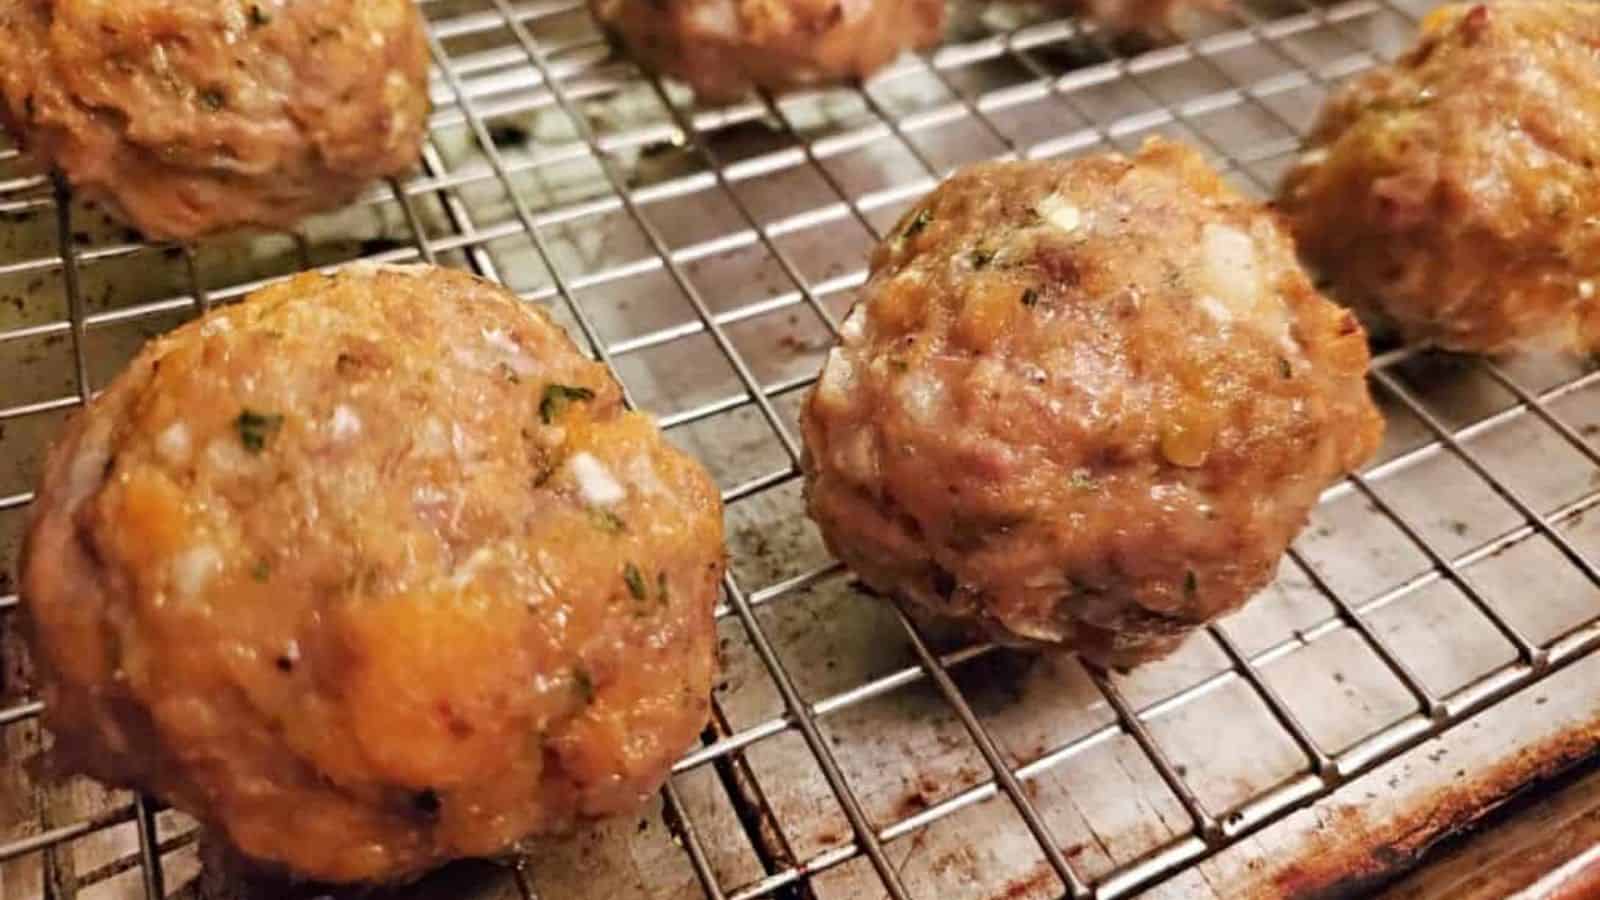 Image shows a baking sheet with a raised tray holding Sweet Potato Turkey Meatballs.